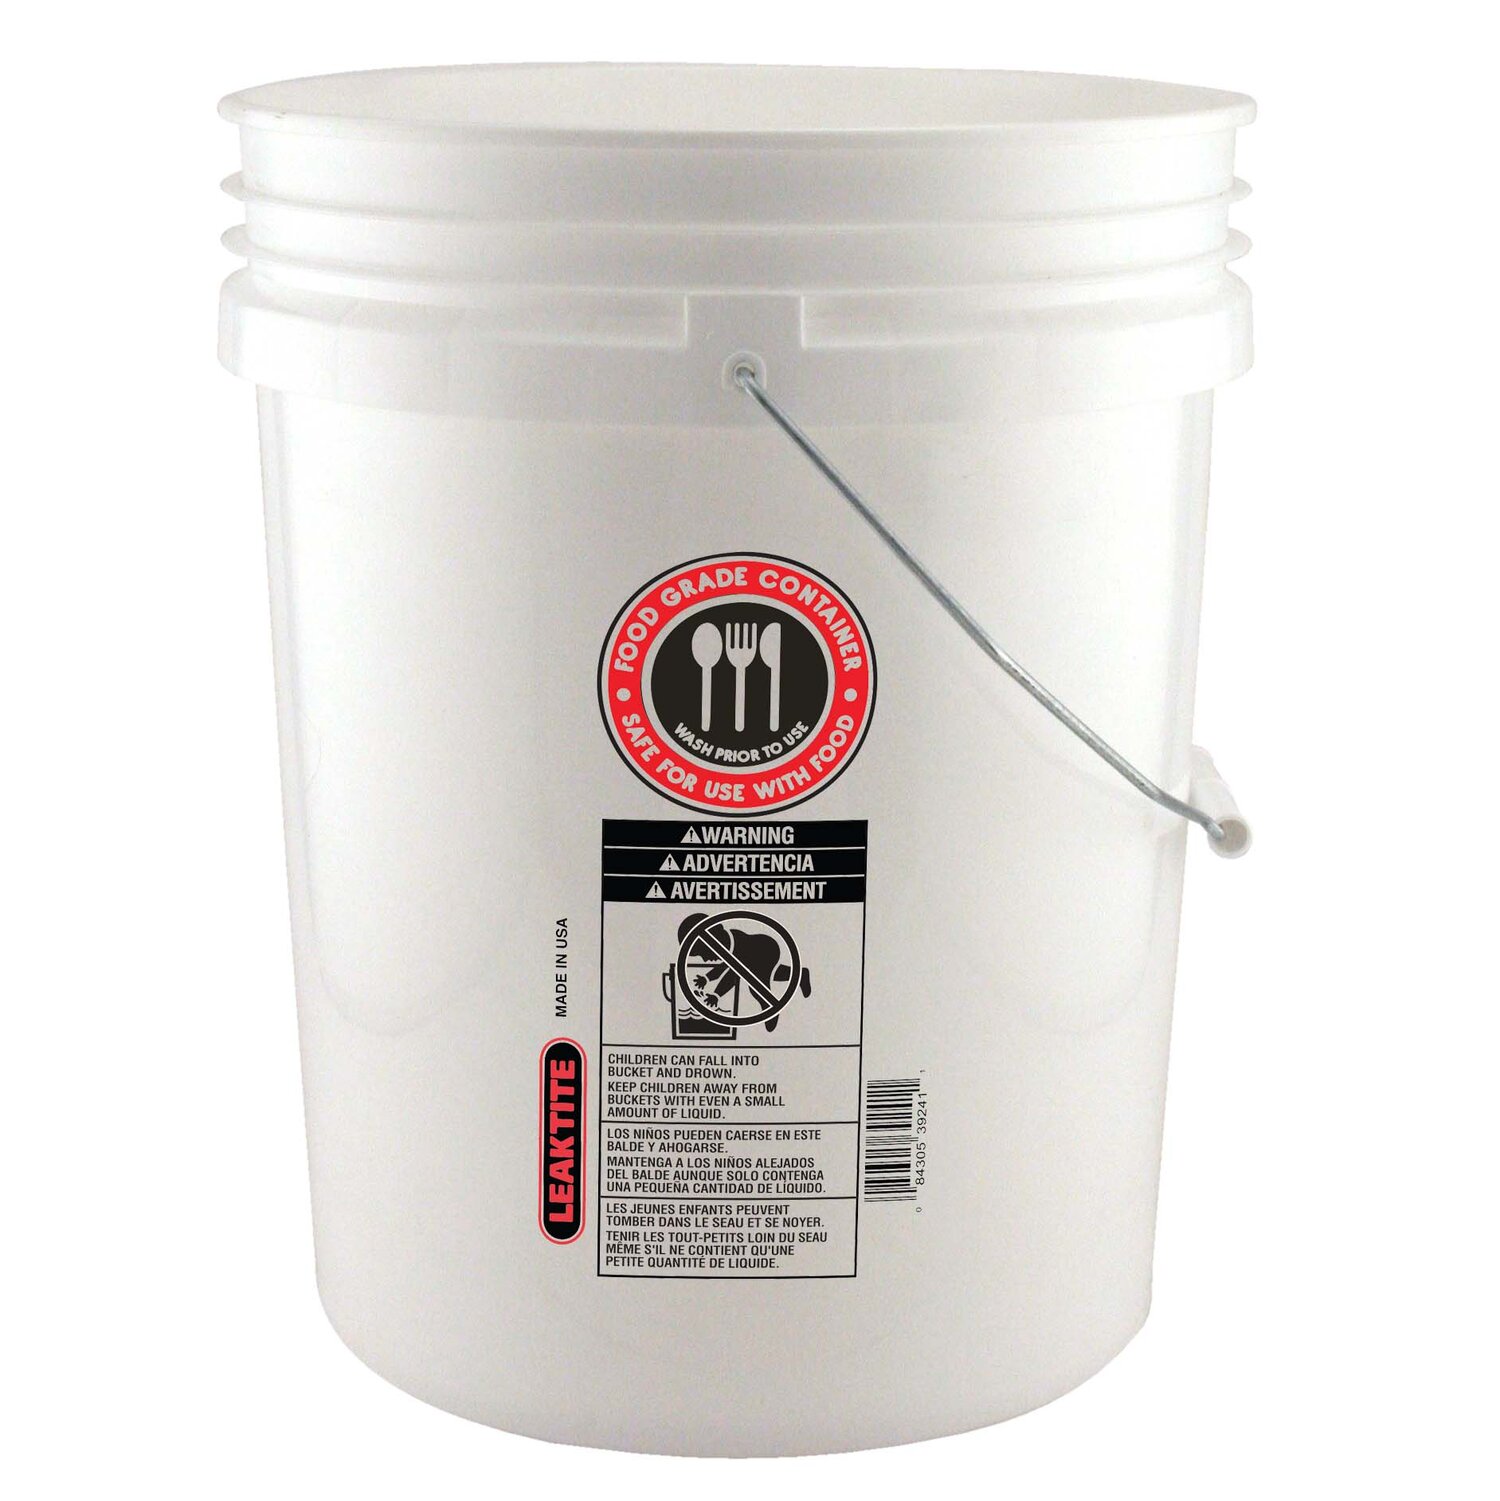 BULK PAINT 20, 5 GALLON CONTAINERS-FREE SHIPPING